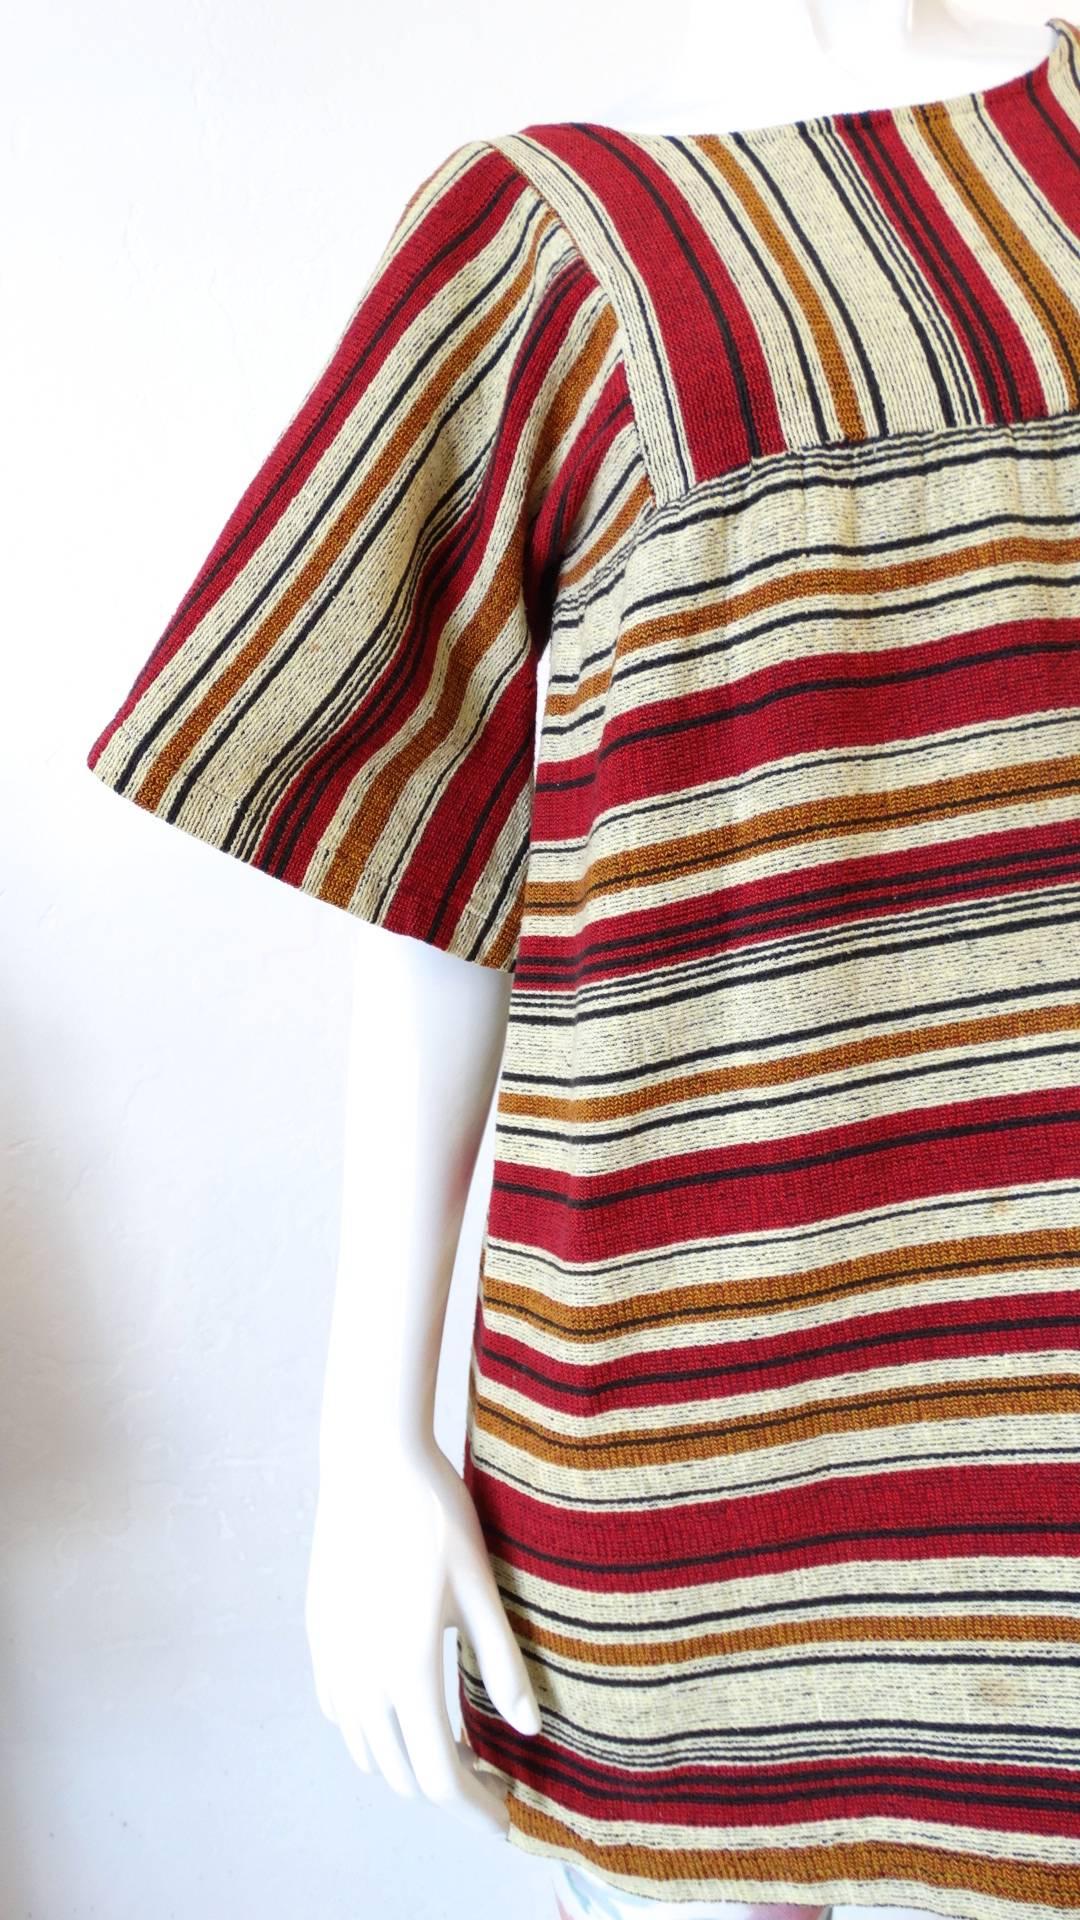 We are obsessed with Israeli label Rikma- and you will be too with this amazing 1970s striped bell sleeve blouse! Made of a thick, quality woven cotton fabric with signature Rikma stripes in shades of red, mustard and black. Trapeze style silhouette